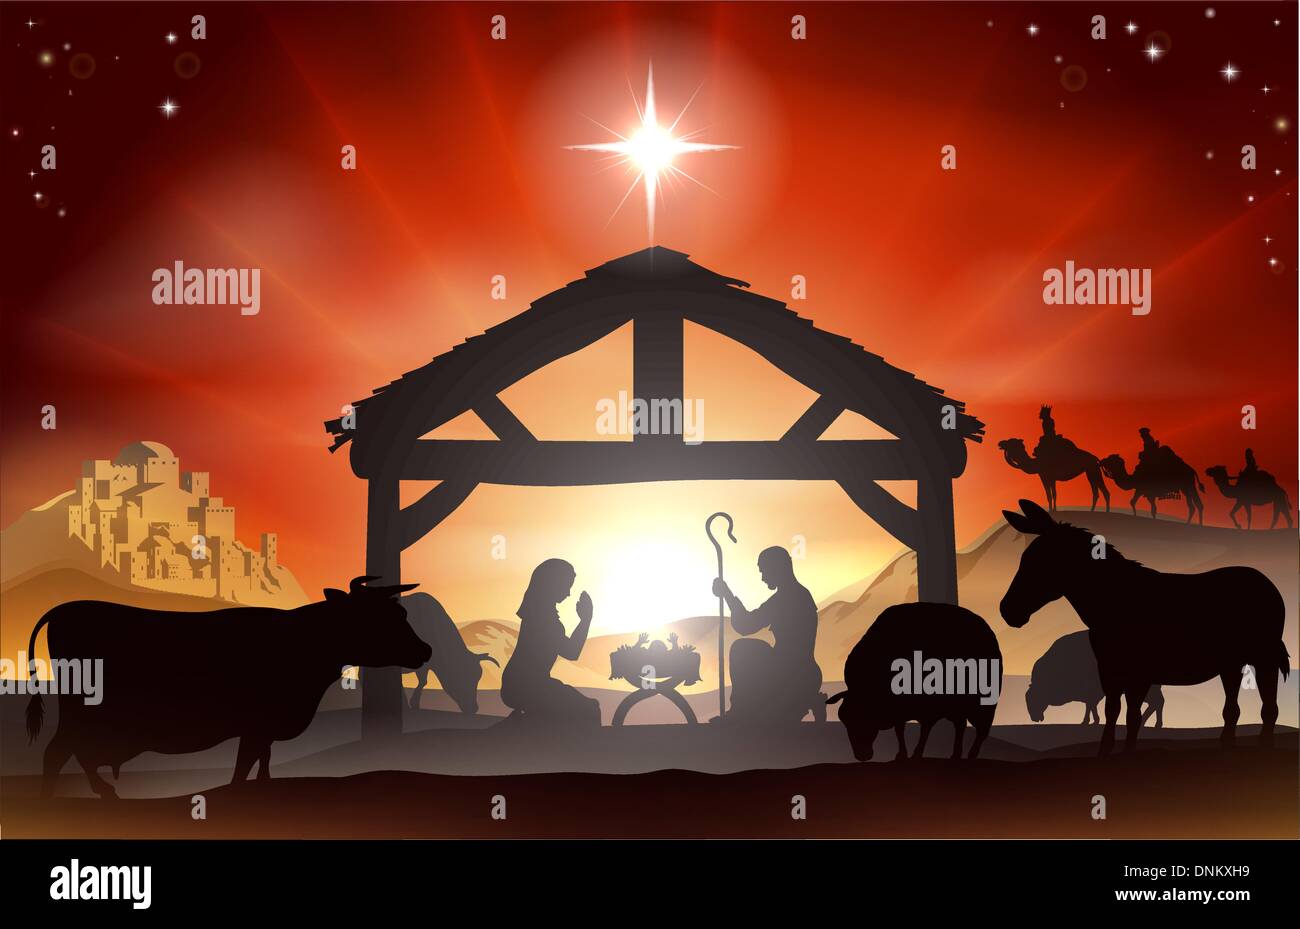 Christmas Christian nativity scene with baby Jesus in the manger in silhouette, three wise men or kings, farm animals and star o Stock Vector